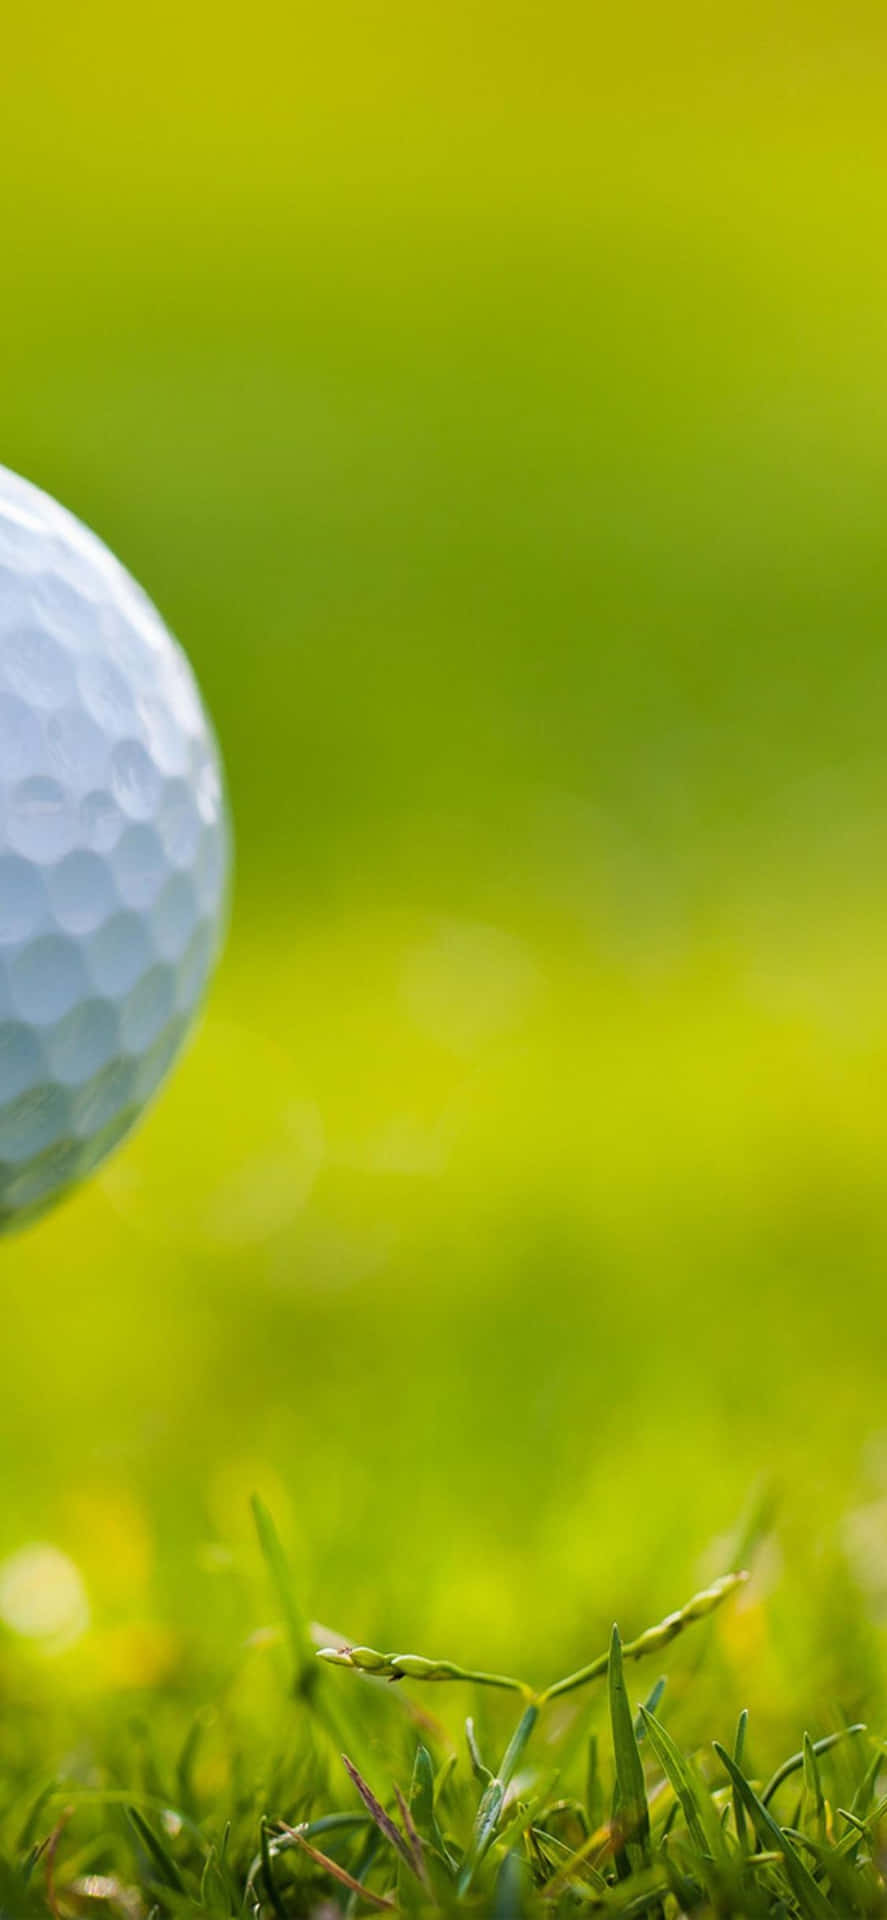 Iphone Xs Golf Background Left Glimpse Of Ball Background